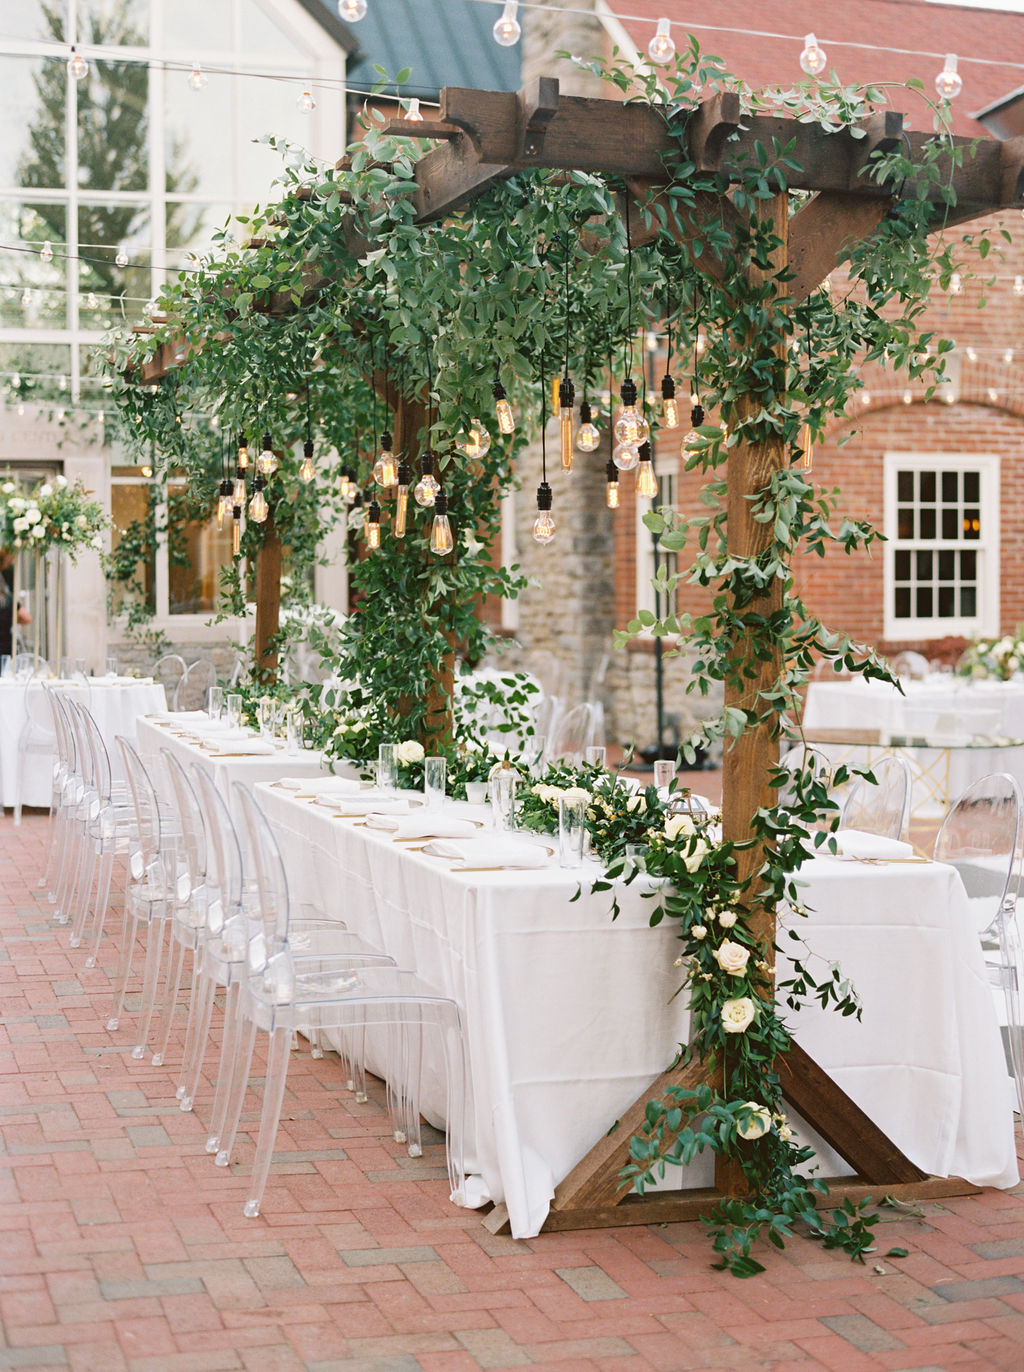 Wooden garden trellis over the head table with natural, vine-like greenery and floral garlands. Nashville Wedding Florist.